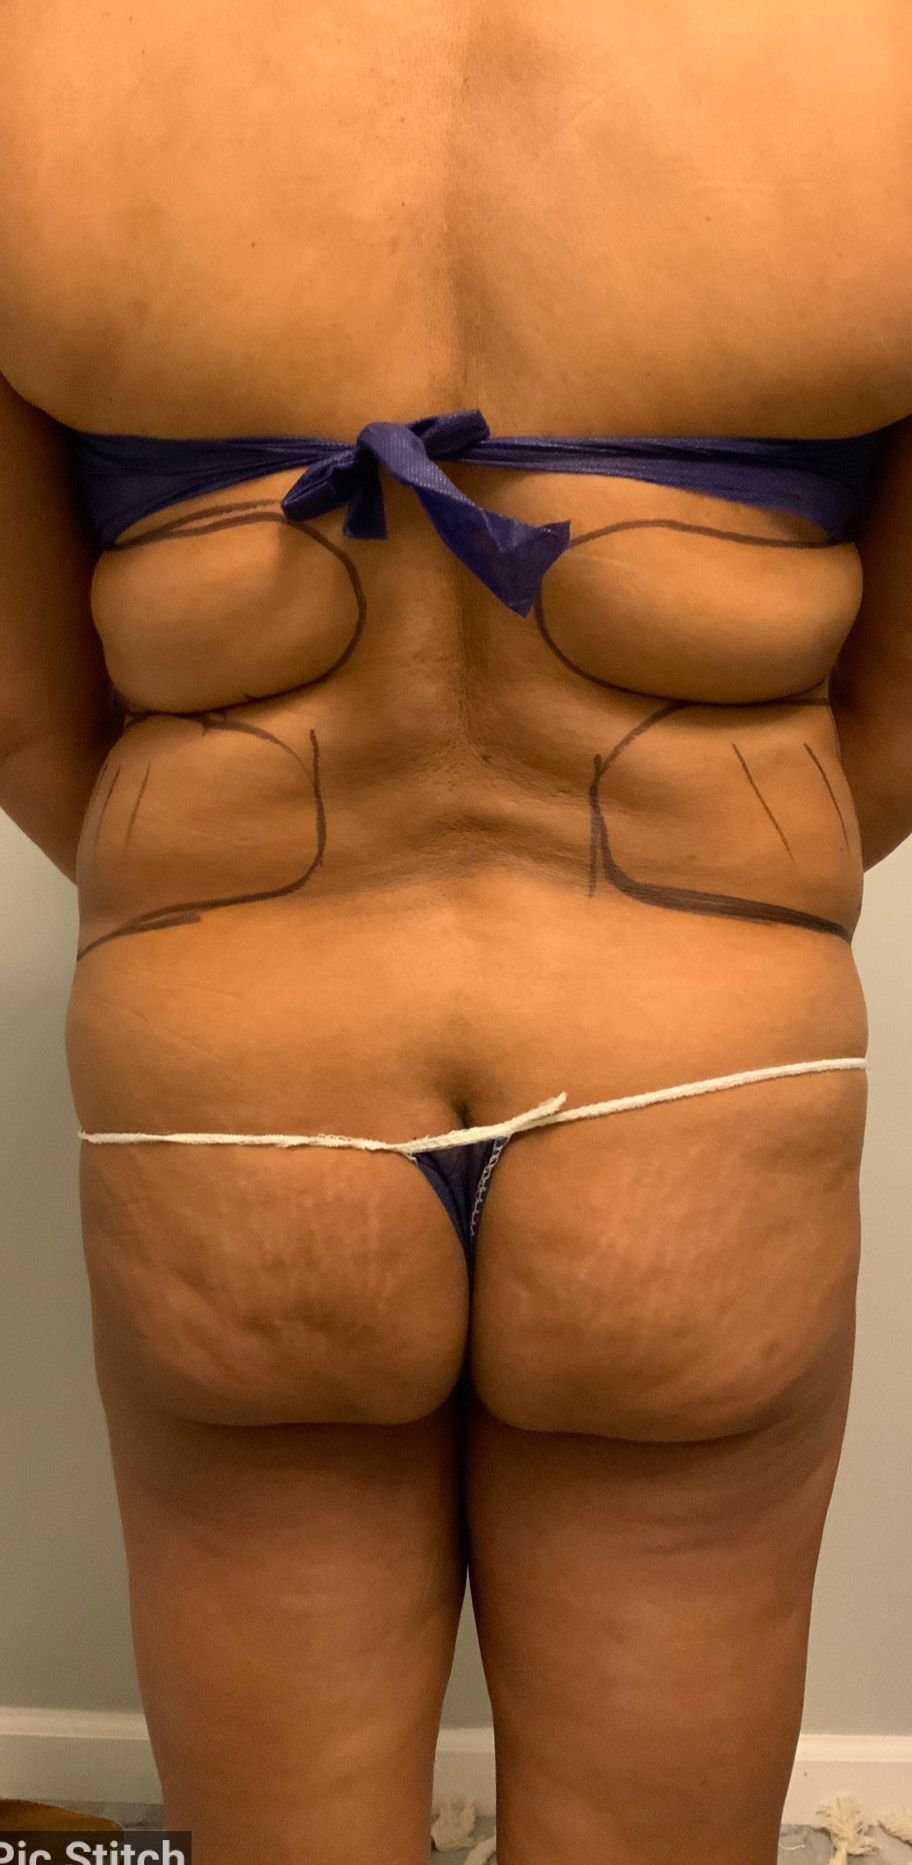 Before Waist Fats Trimming - Columbus, OH - Simply Sculpt